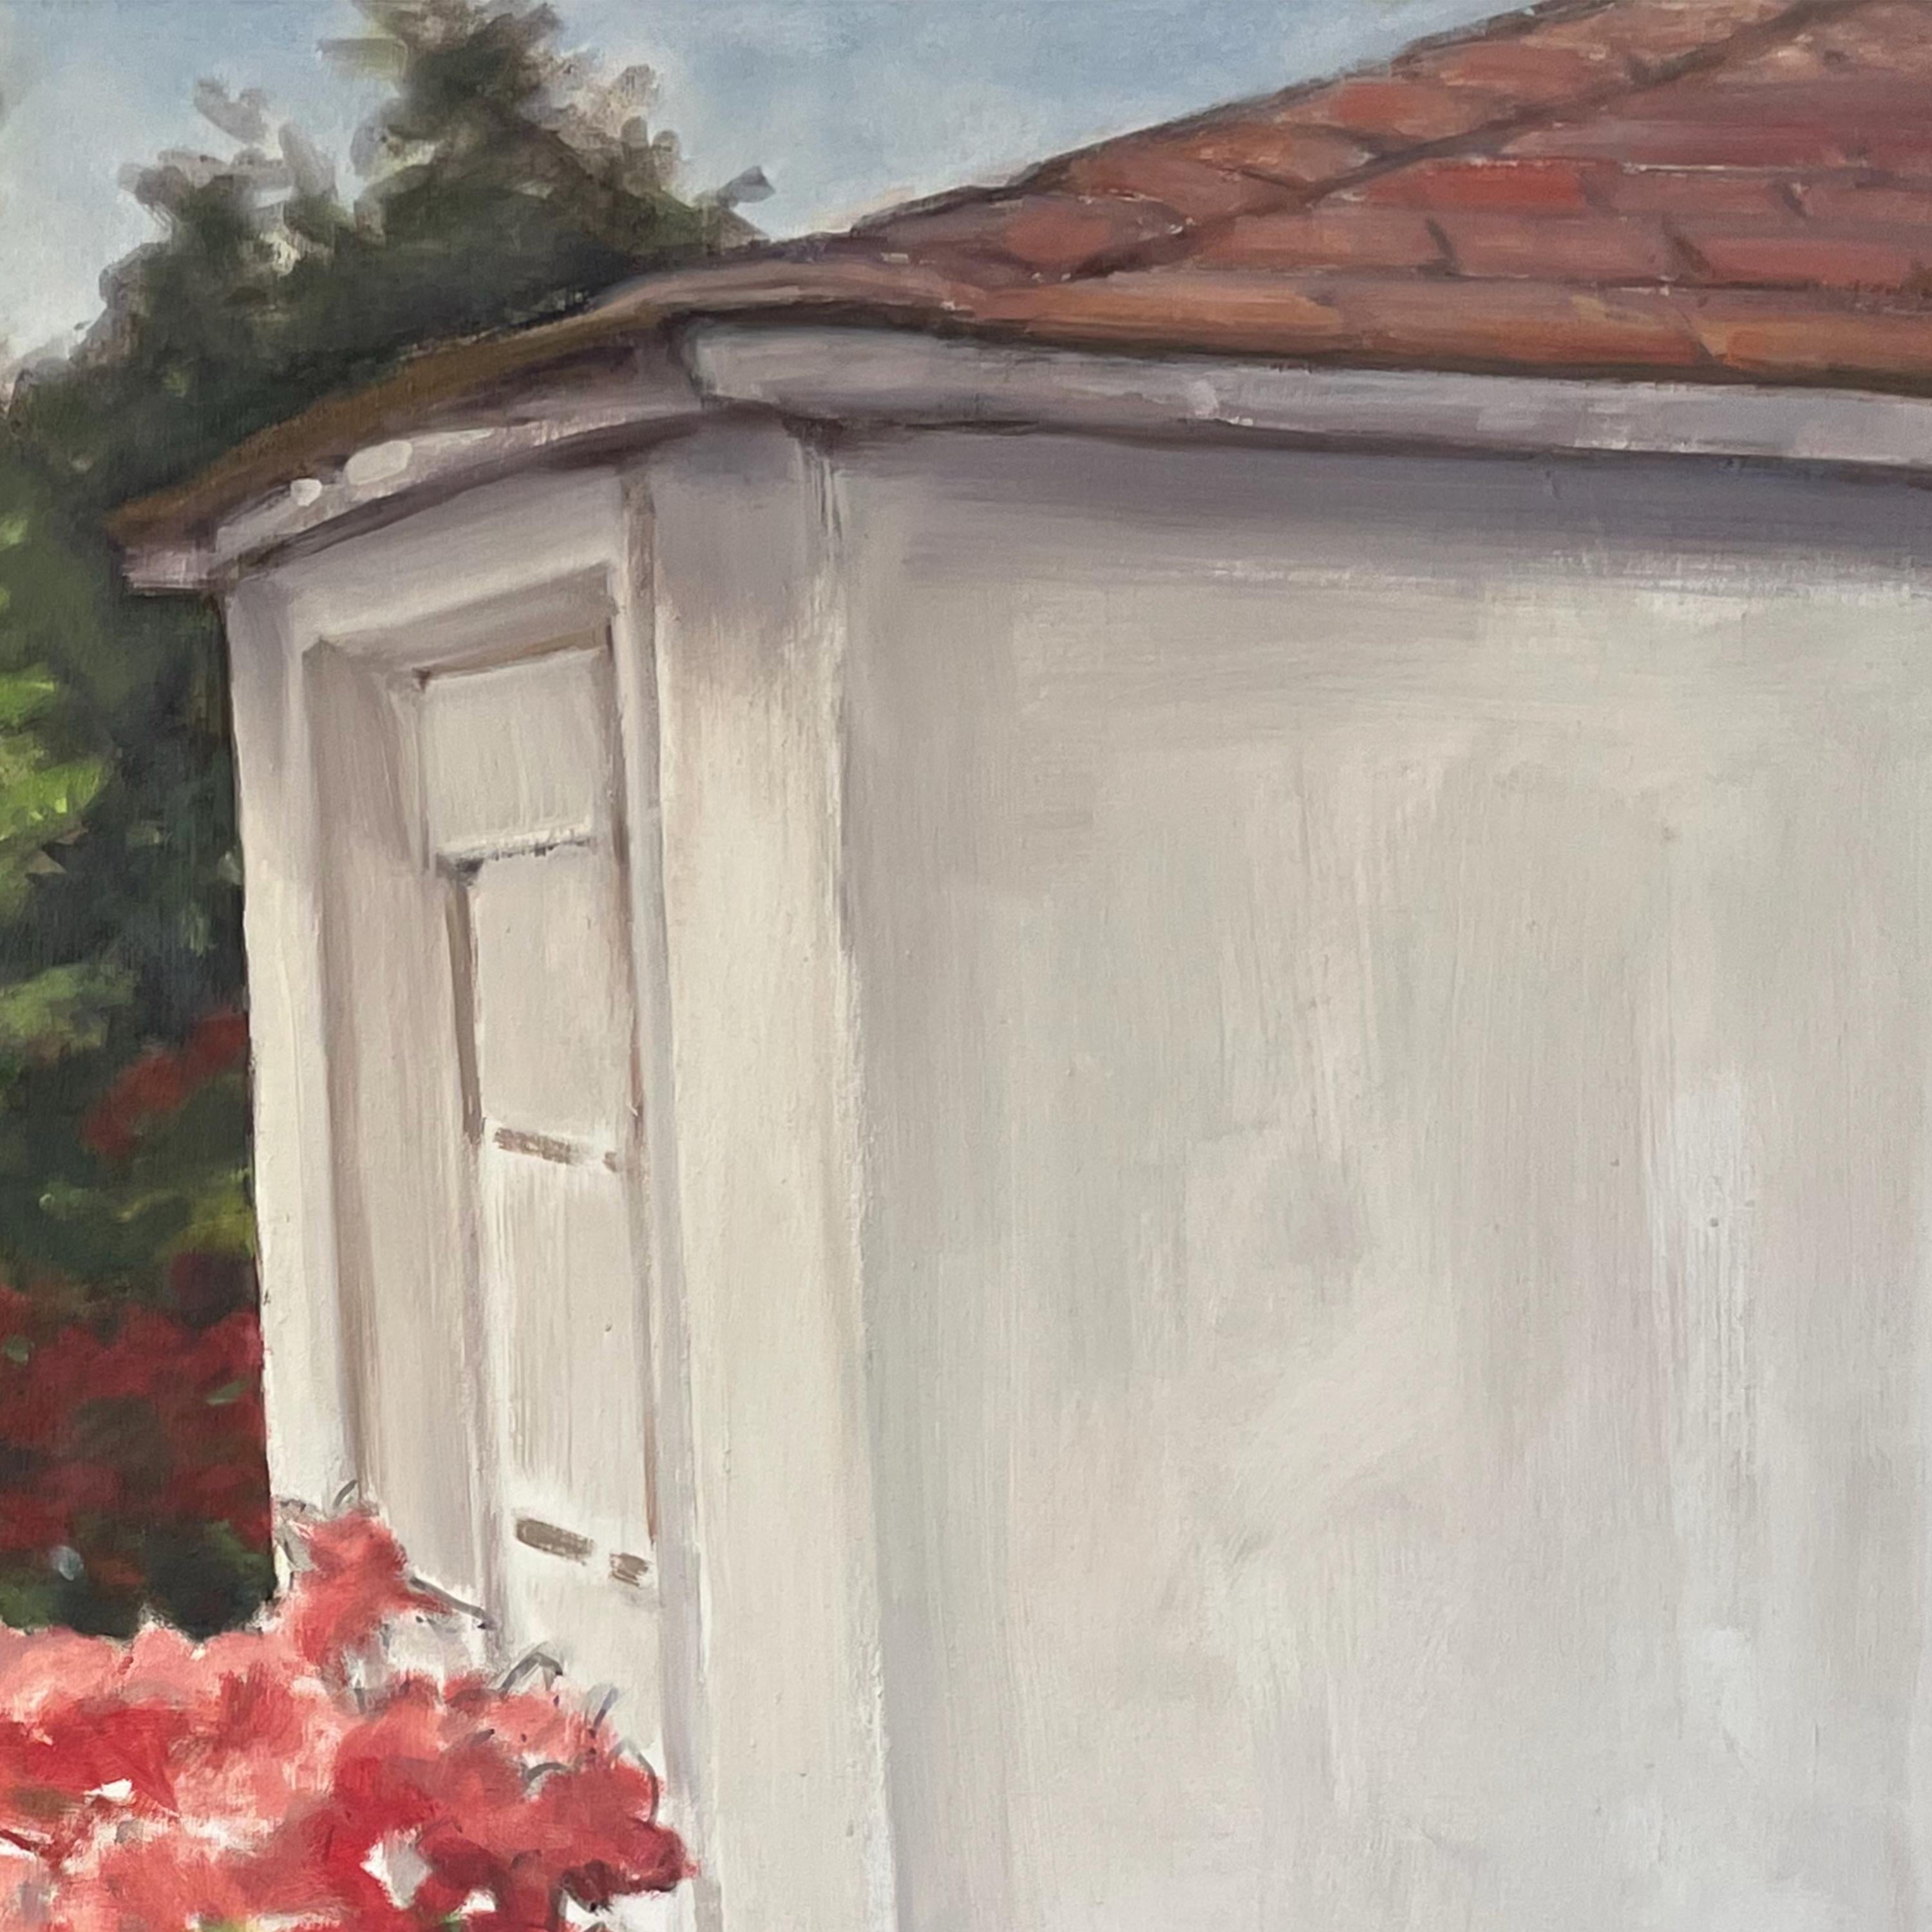 Azalea by a Garage Door, 2010, oil on canvas, floral outdoor painting - Impressionist Painting by Daisy Craddock